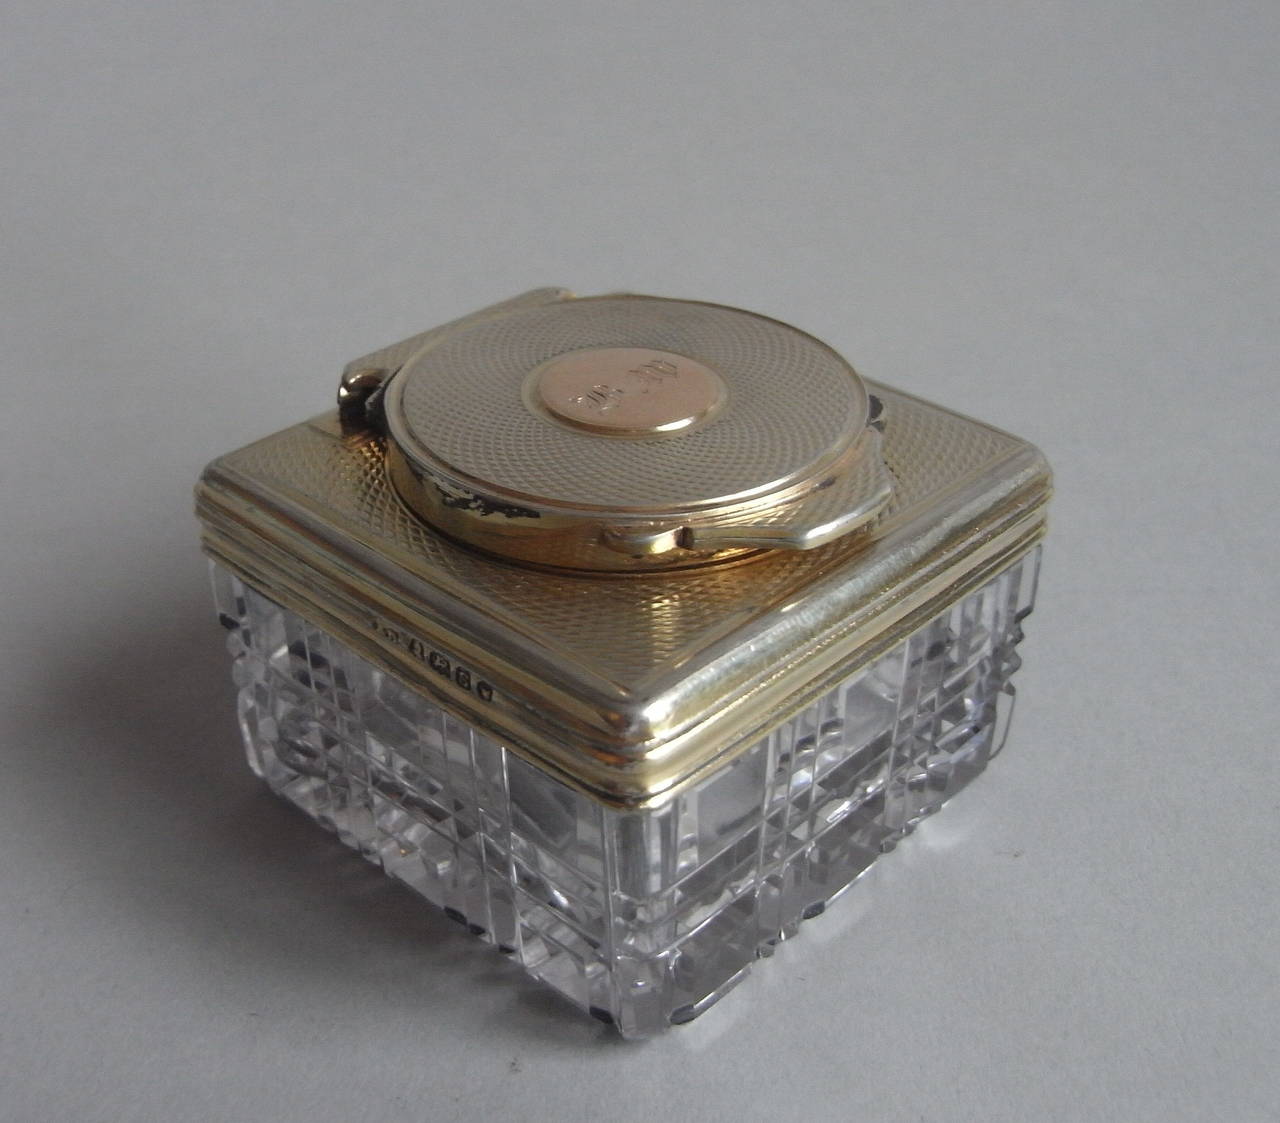 The inkwell is of square form with attractive engine turned silver gilt mounts. The glass is deeply cut and the hinged cover displays a gold disc cartouche engraved with a set of contemporary initials. This piece is very well marked and is in